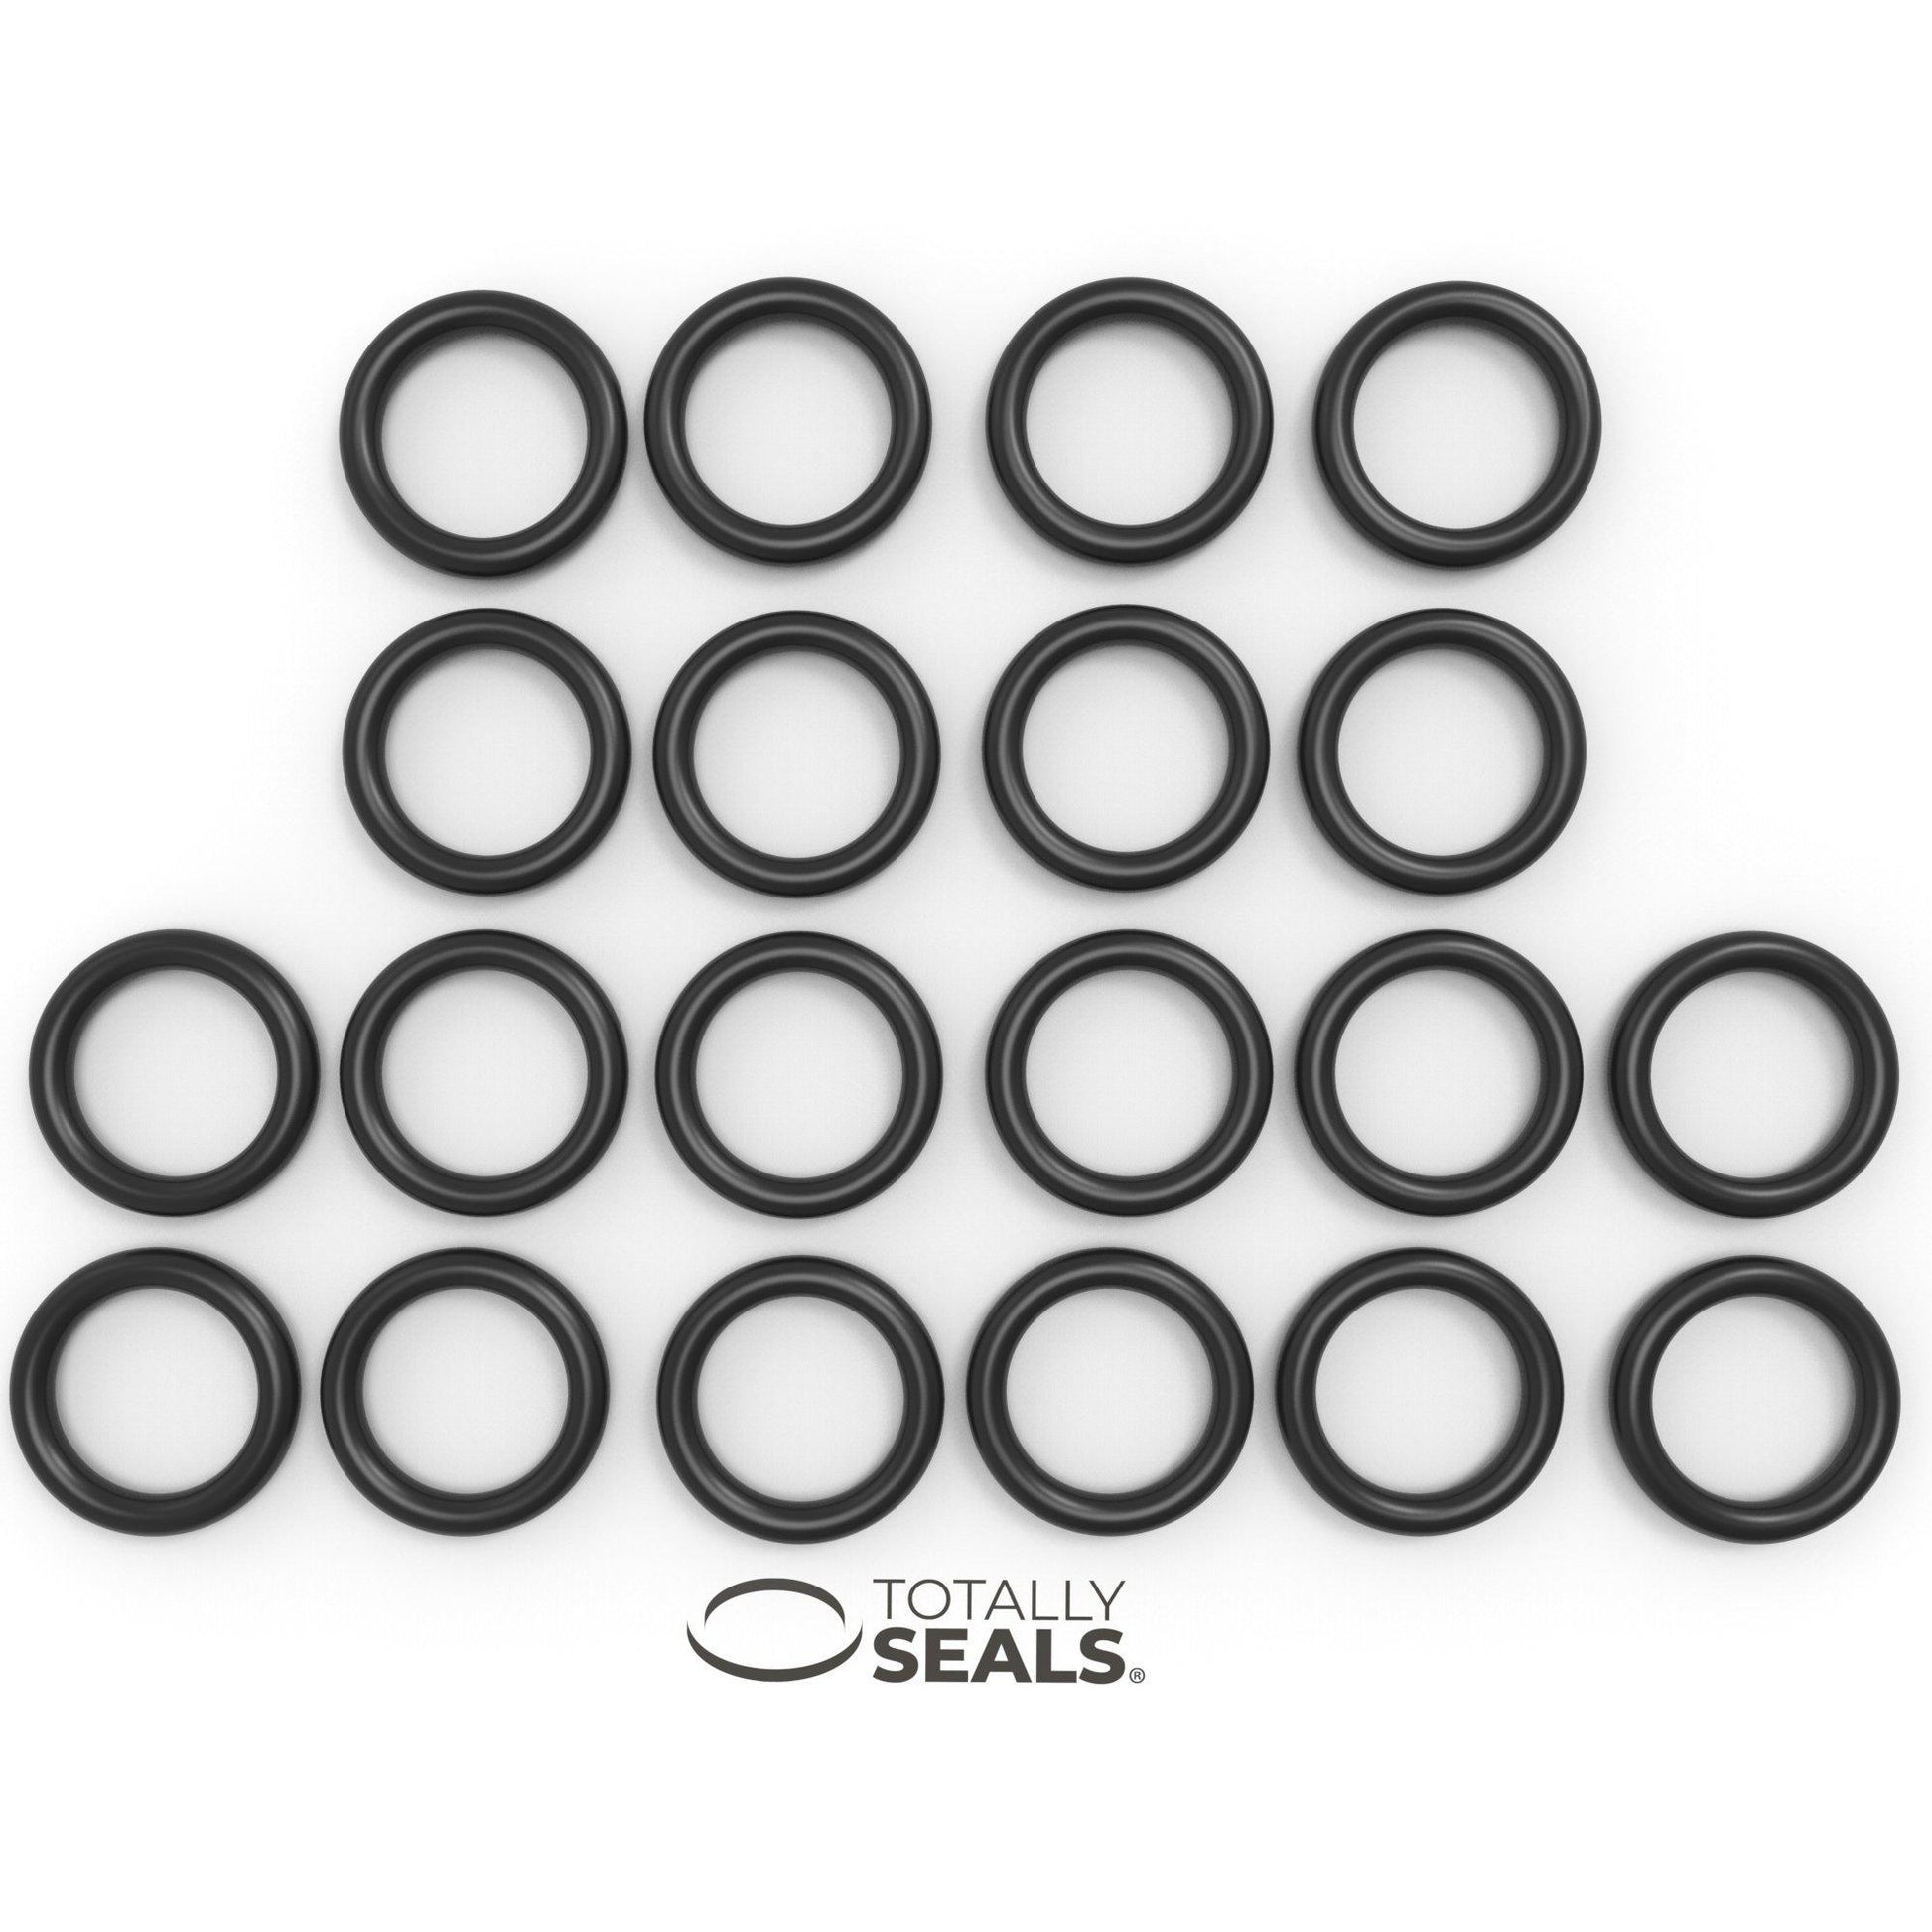 28mm x 2mm (32mm OD) Nitrile O-Rings - Totally Seals®